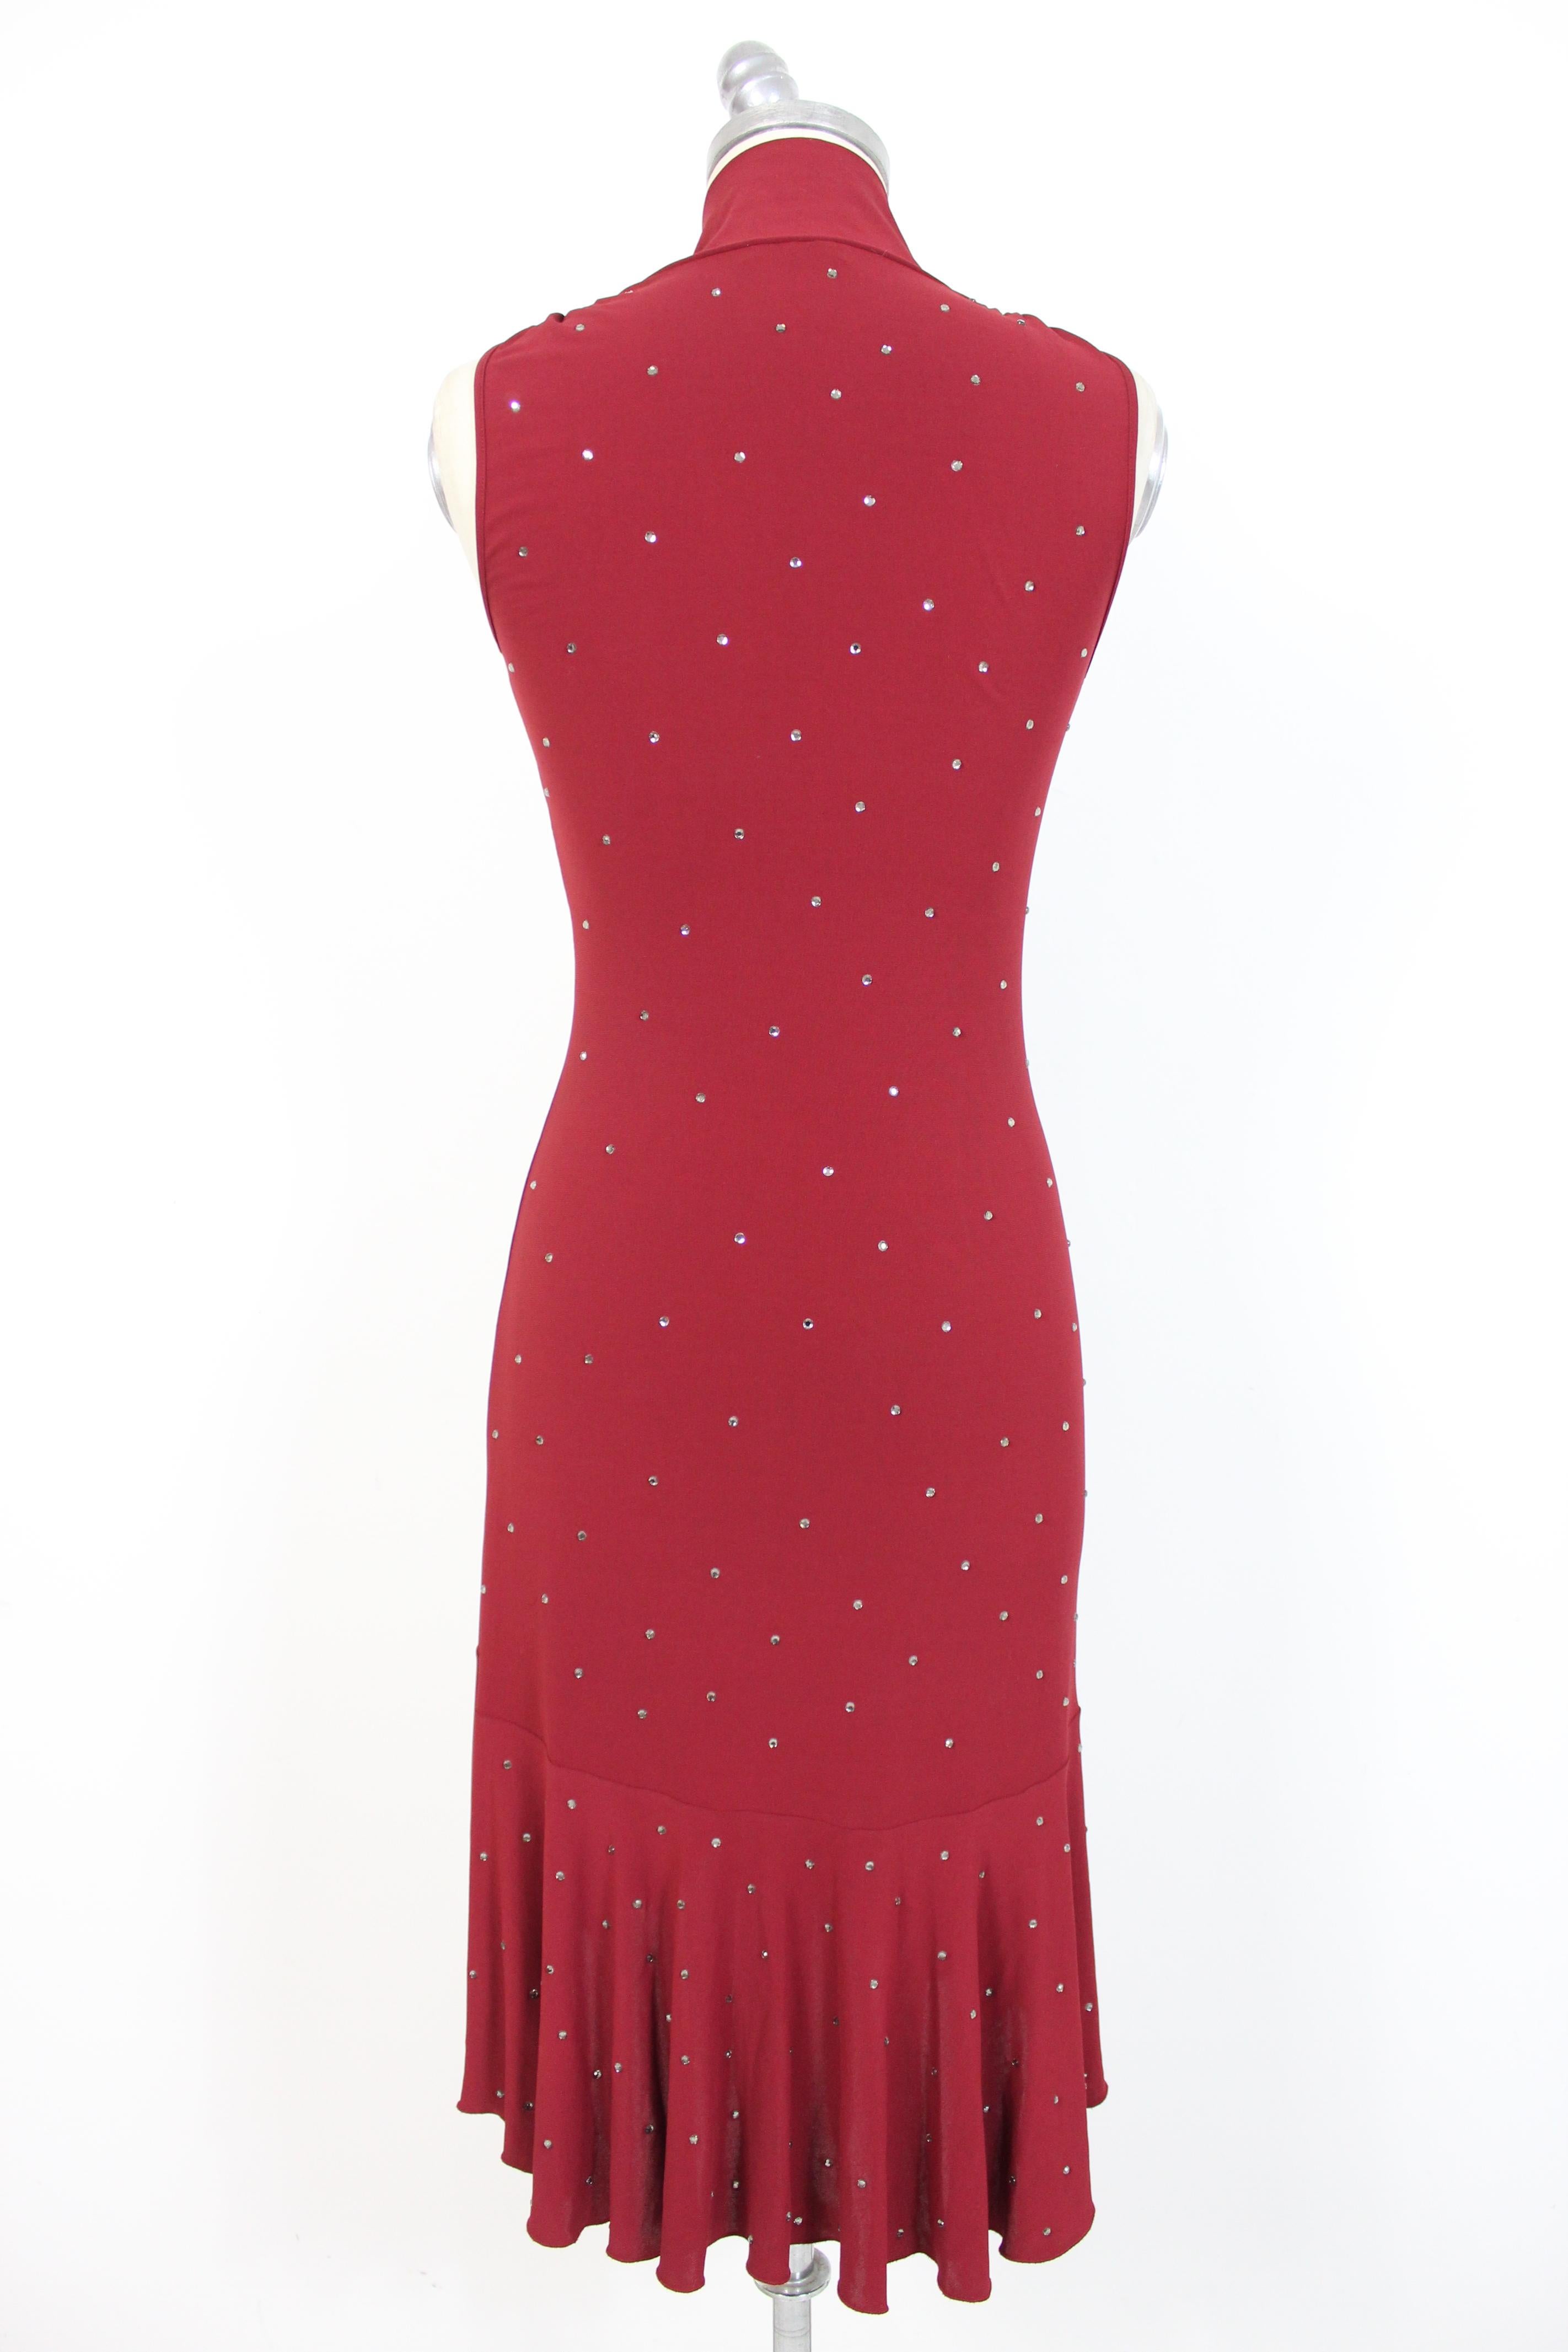 Moschino Cheap and Chic 90s vintage woman dress. Long dress, V-neckline with neck scarf. Flared skirt and longer on the back. Rhinestone applications. Burgundy color, fabric: 73% acetate, 18% polyamide, 9% elastane. Made in Italy. Excellent vintage